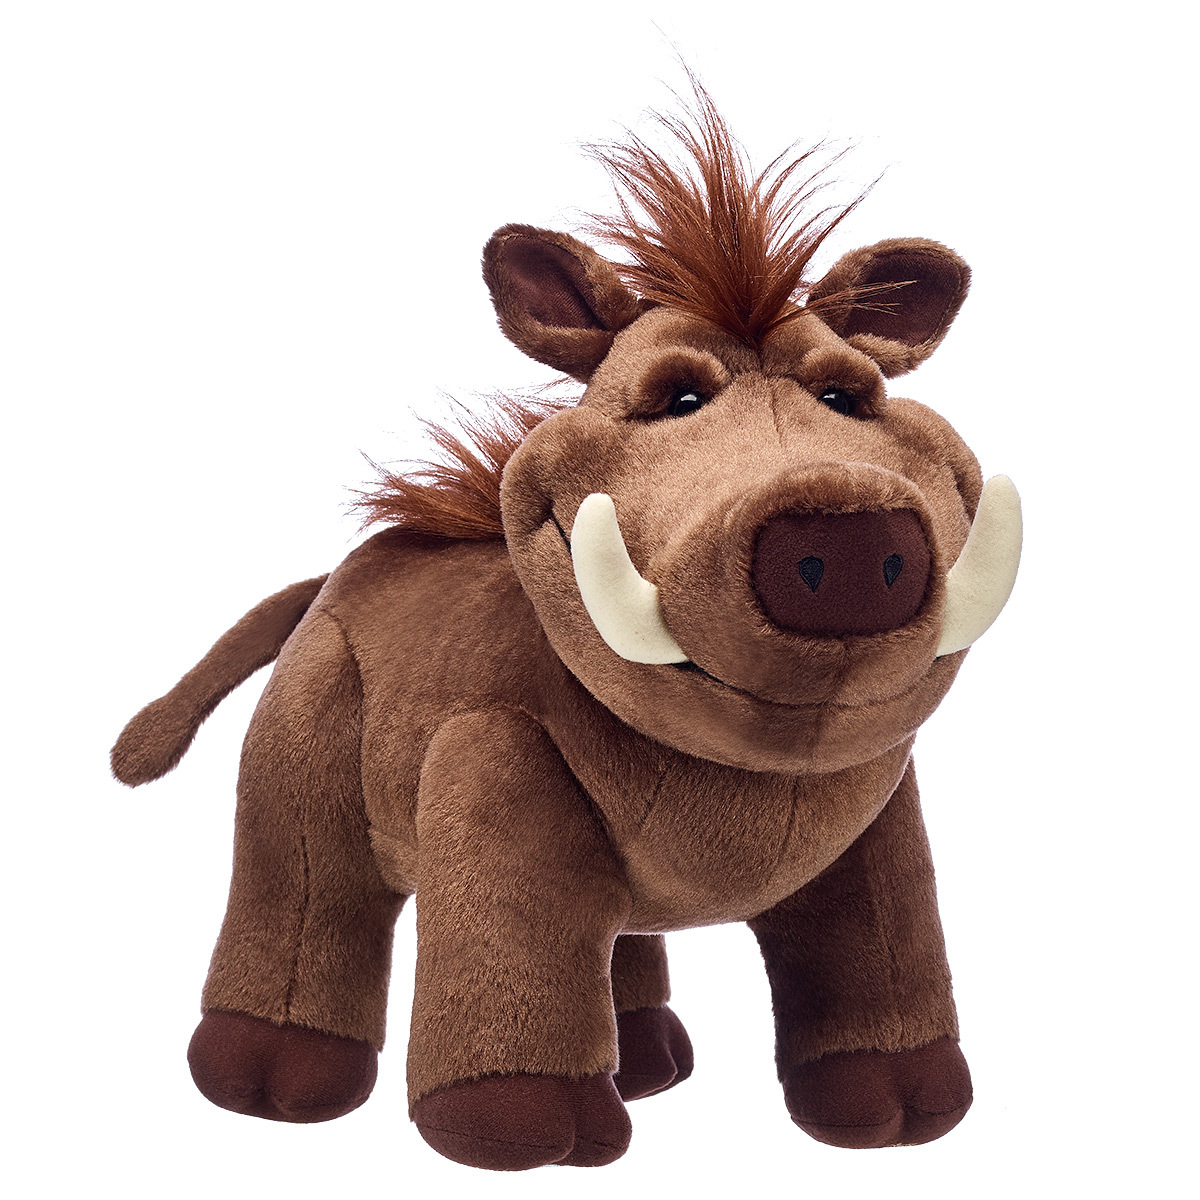 build-a-bear releases 'the lion king' adorable collection, and is super cute